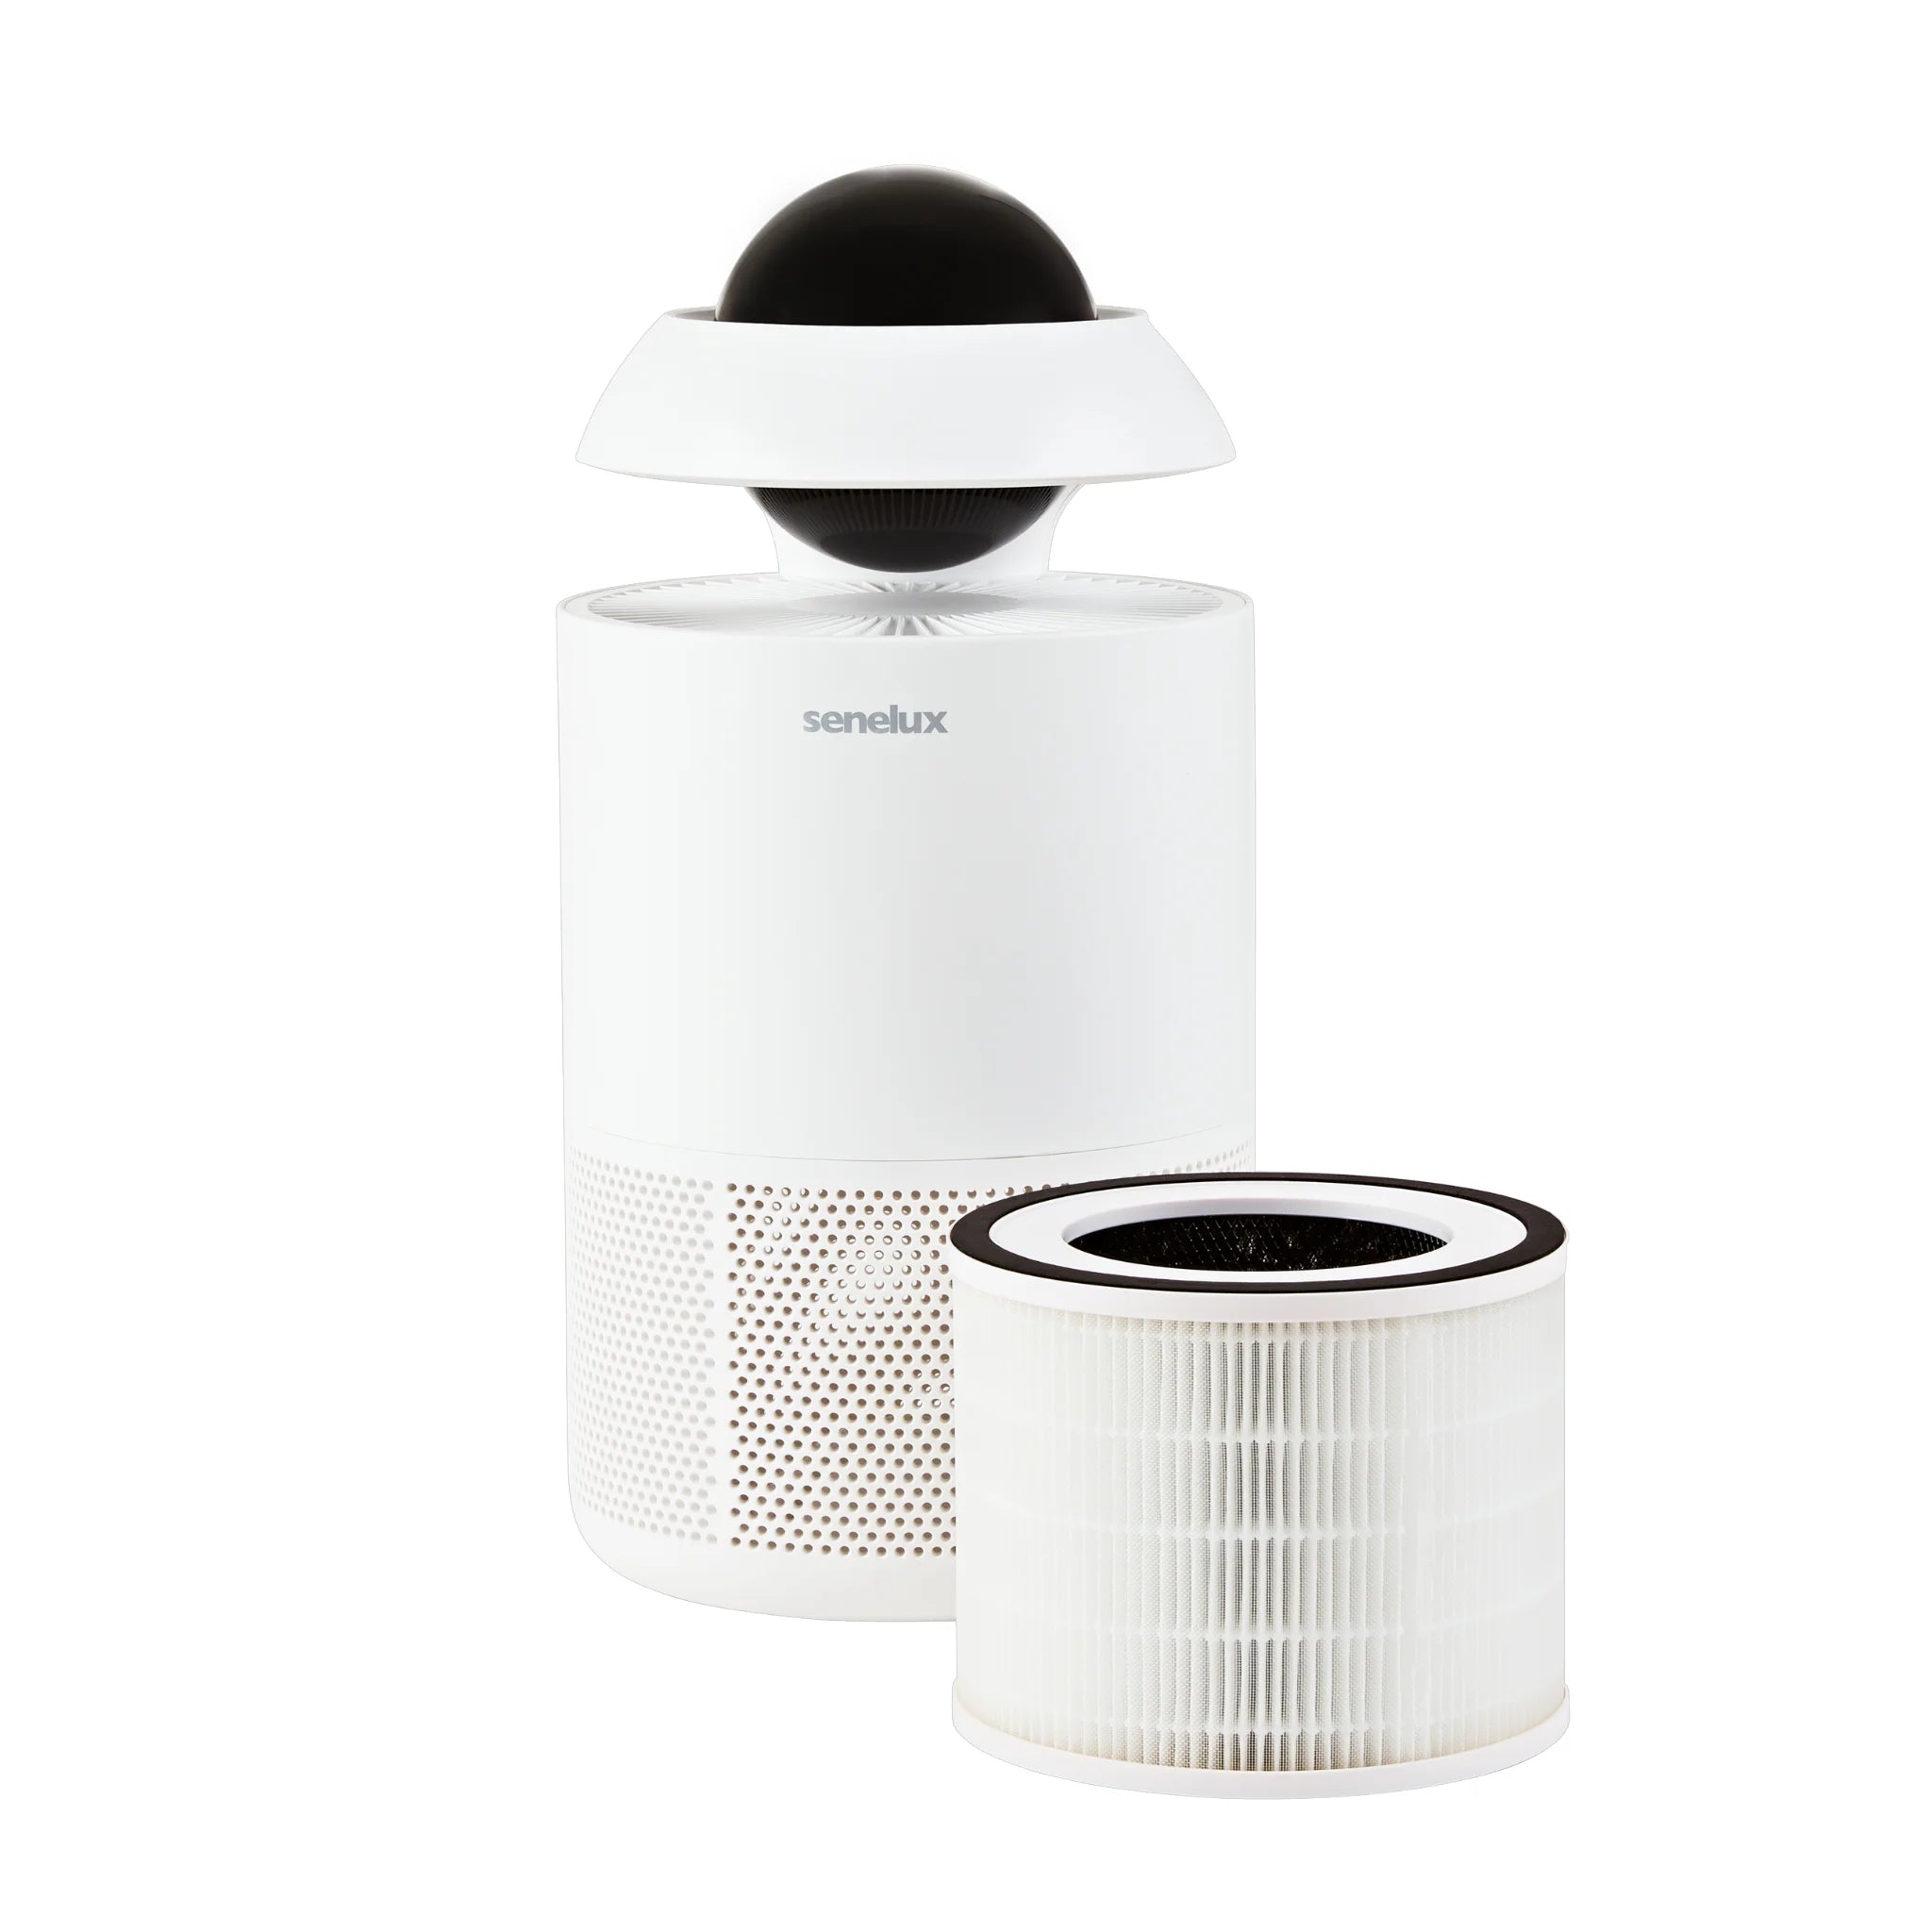 The Senelux Air Purifier with its easy-removal filter placed next to it.